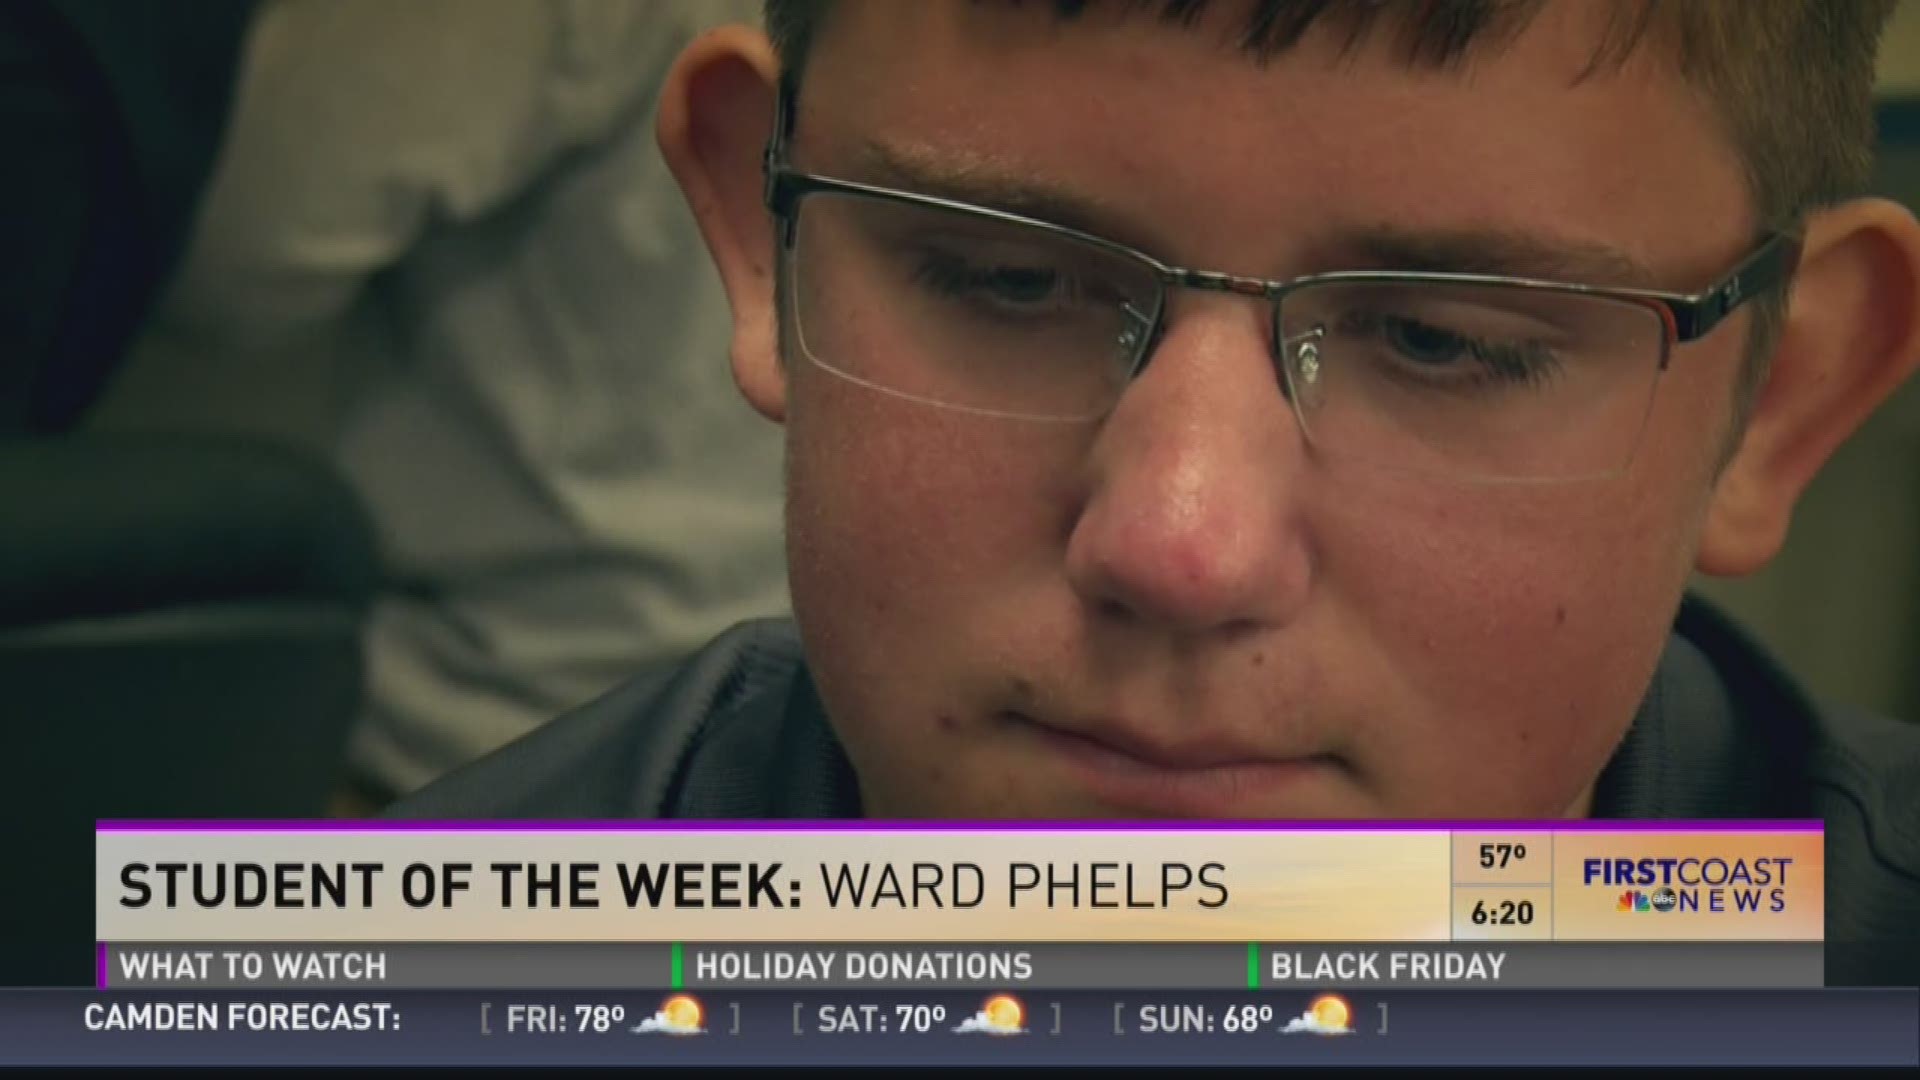 Student of the week: Ward Phelps